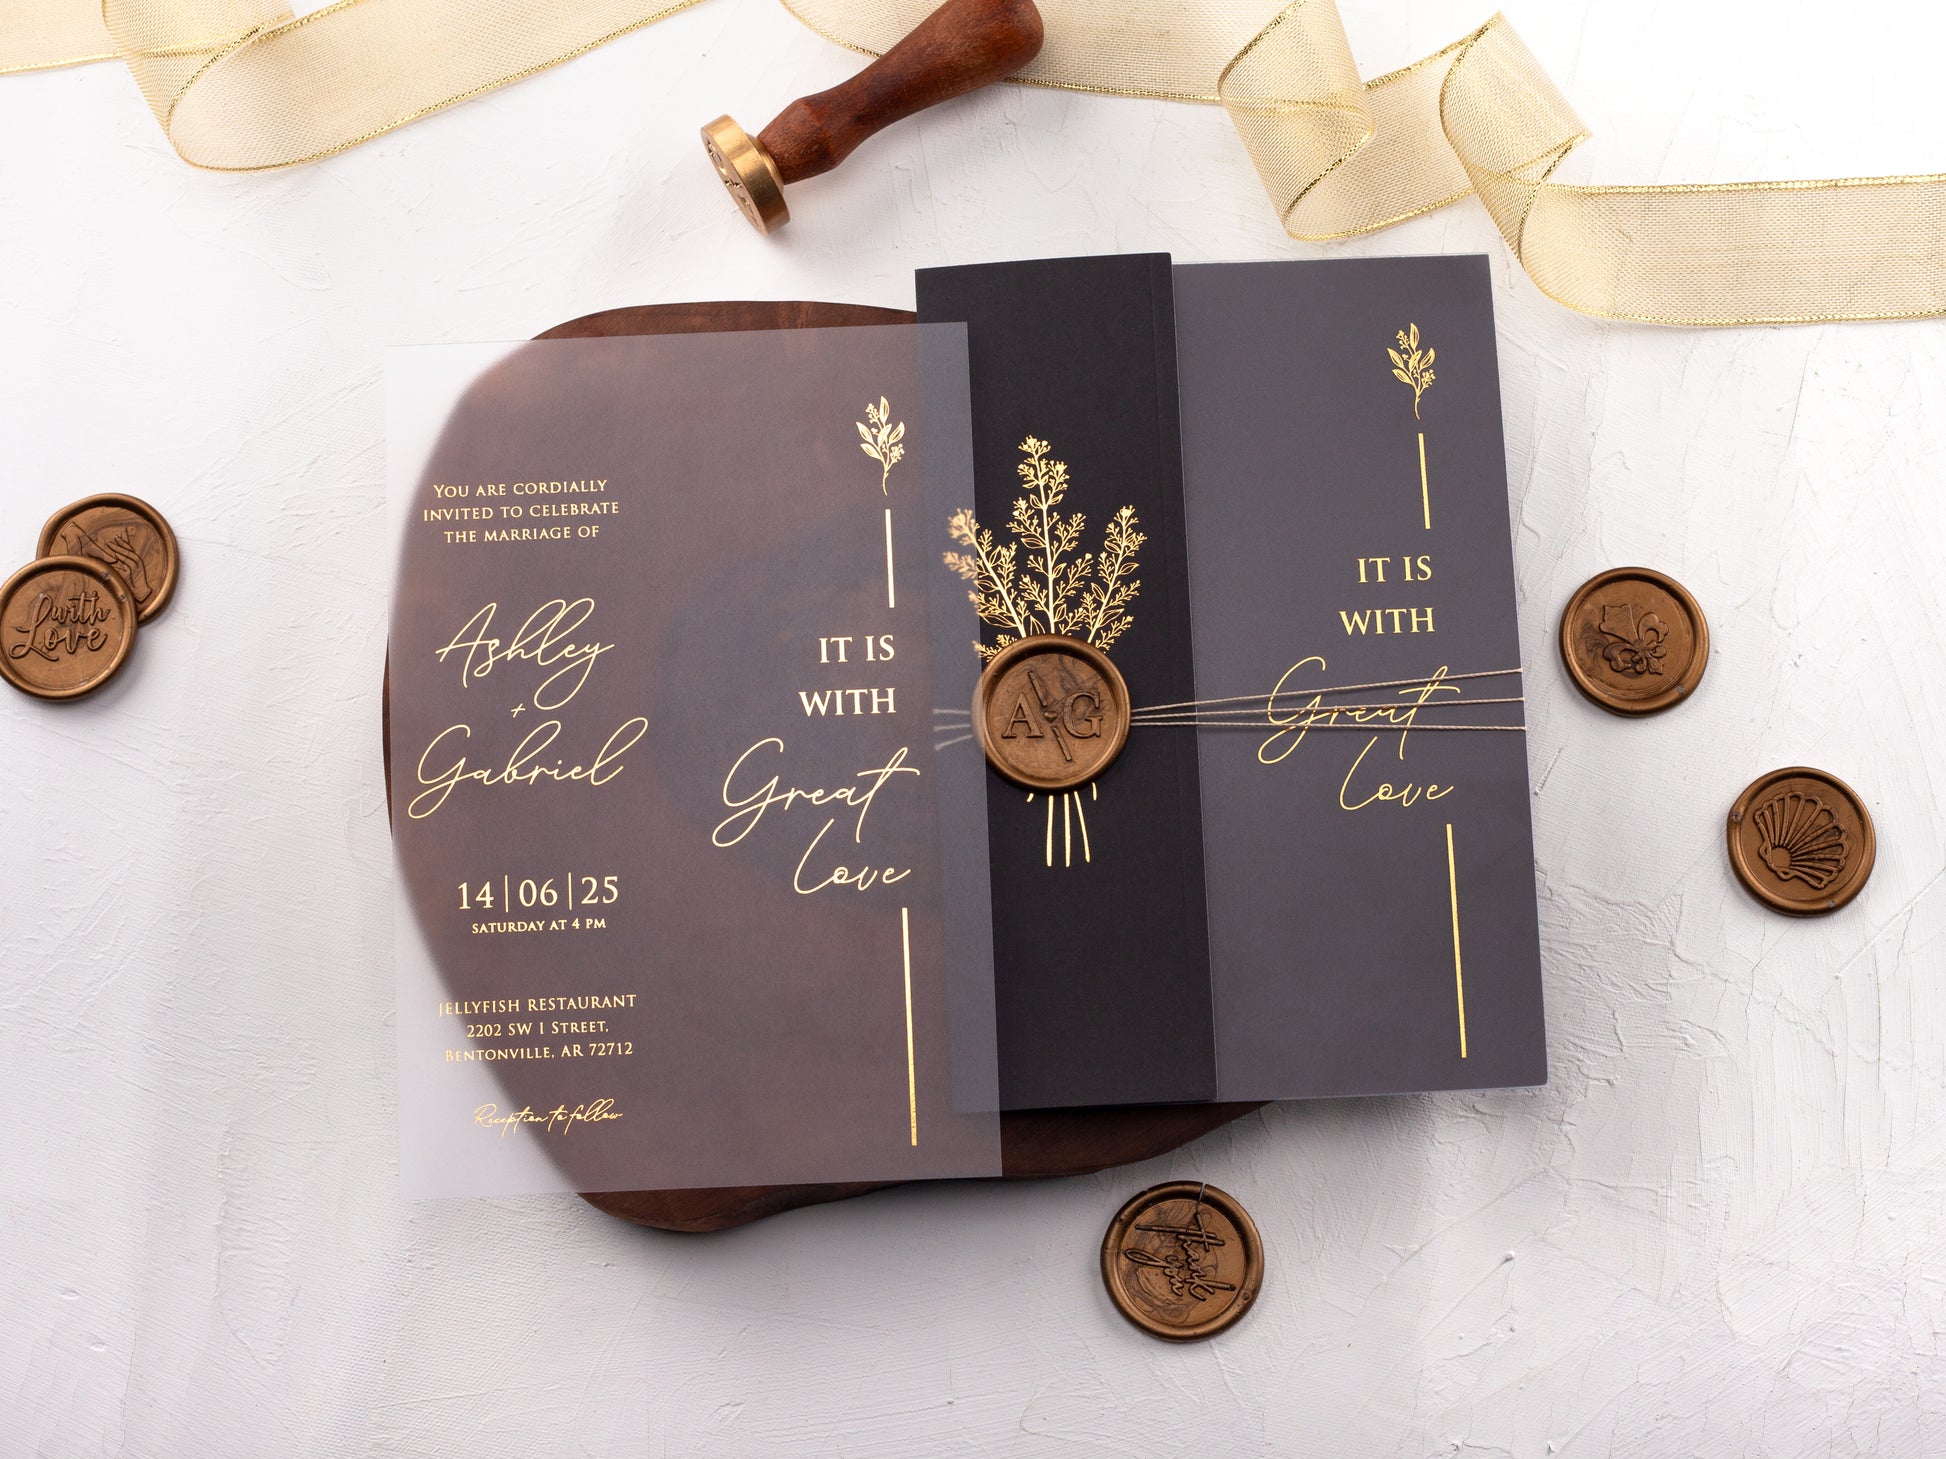 Gold Foiled Acrylic Invitations with Black Half Jackets